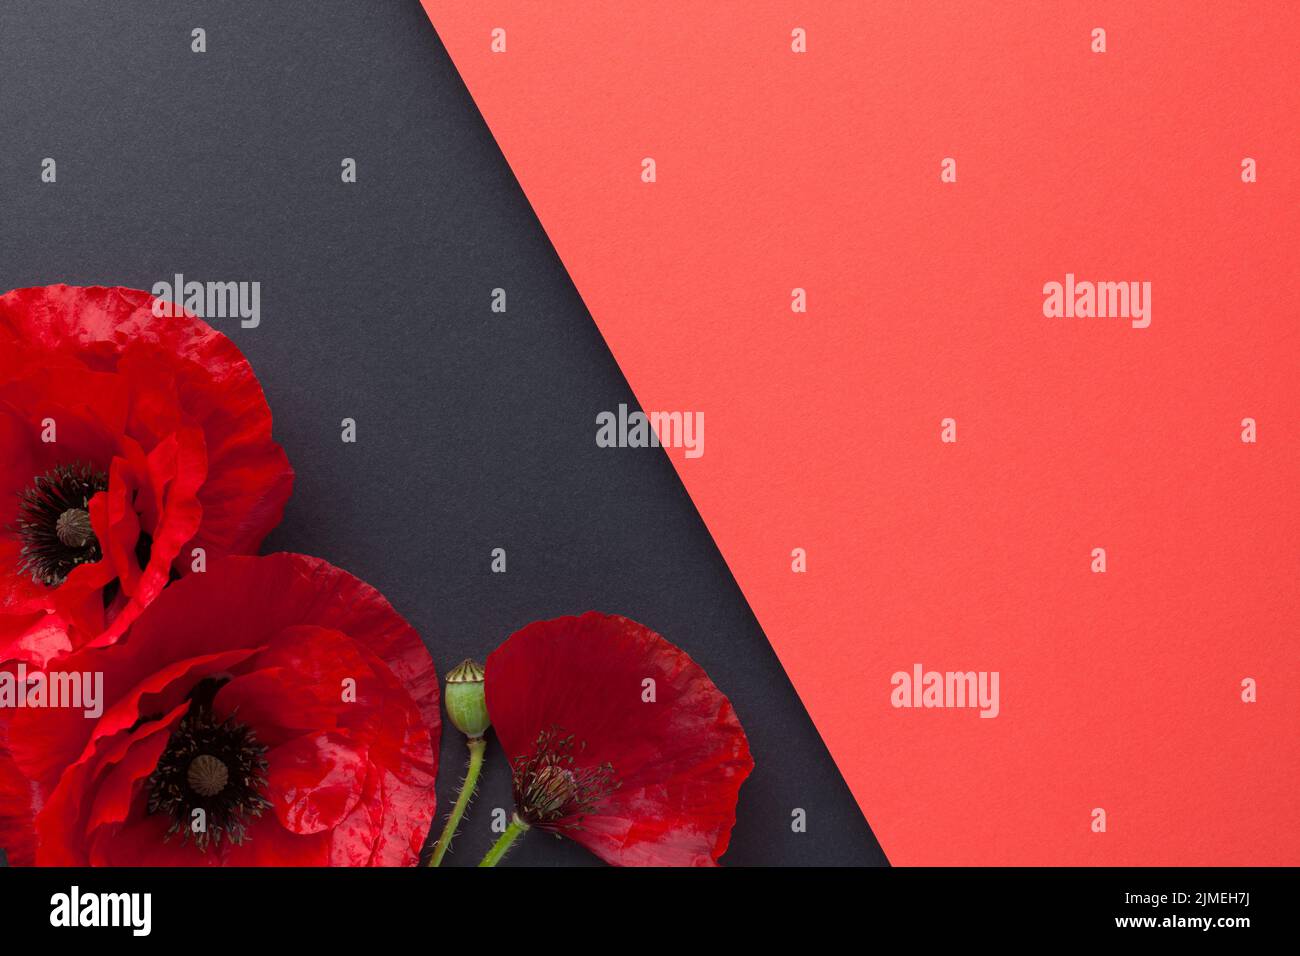 Poppy Flowers On Paper Background Flat Lay Stock Photo